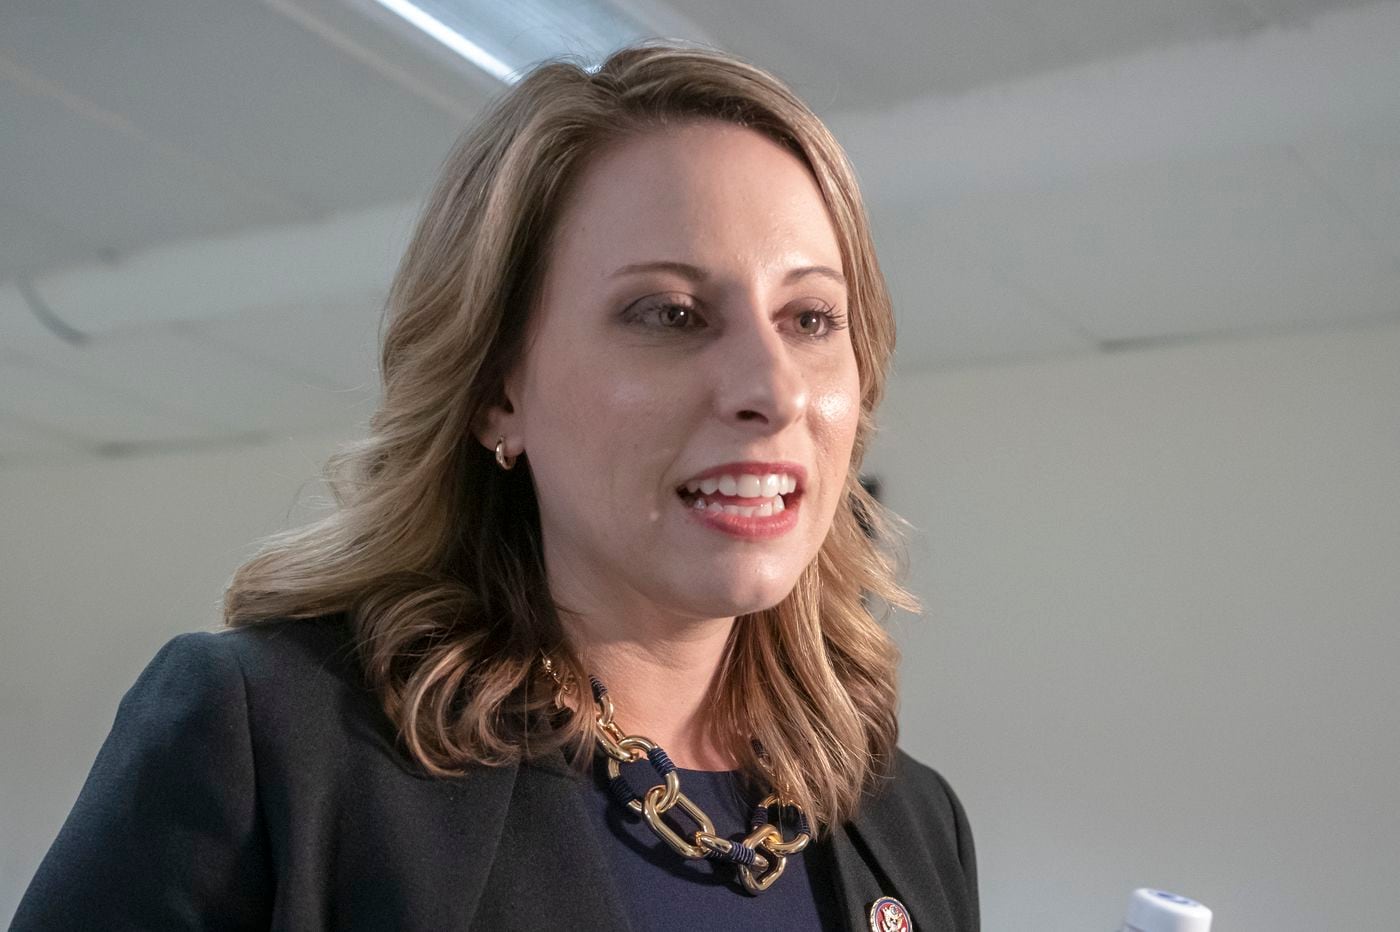 Revenage Porn - Rep. Katie Hill resigned because she behaved unethically ...